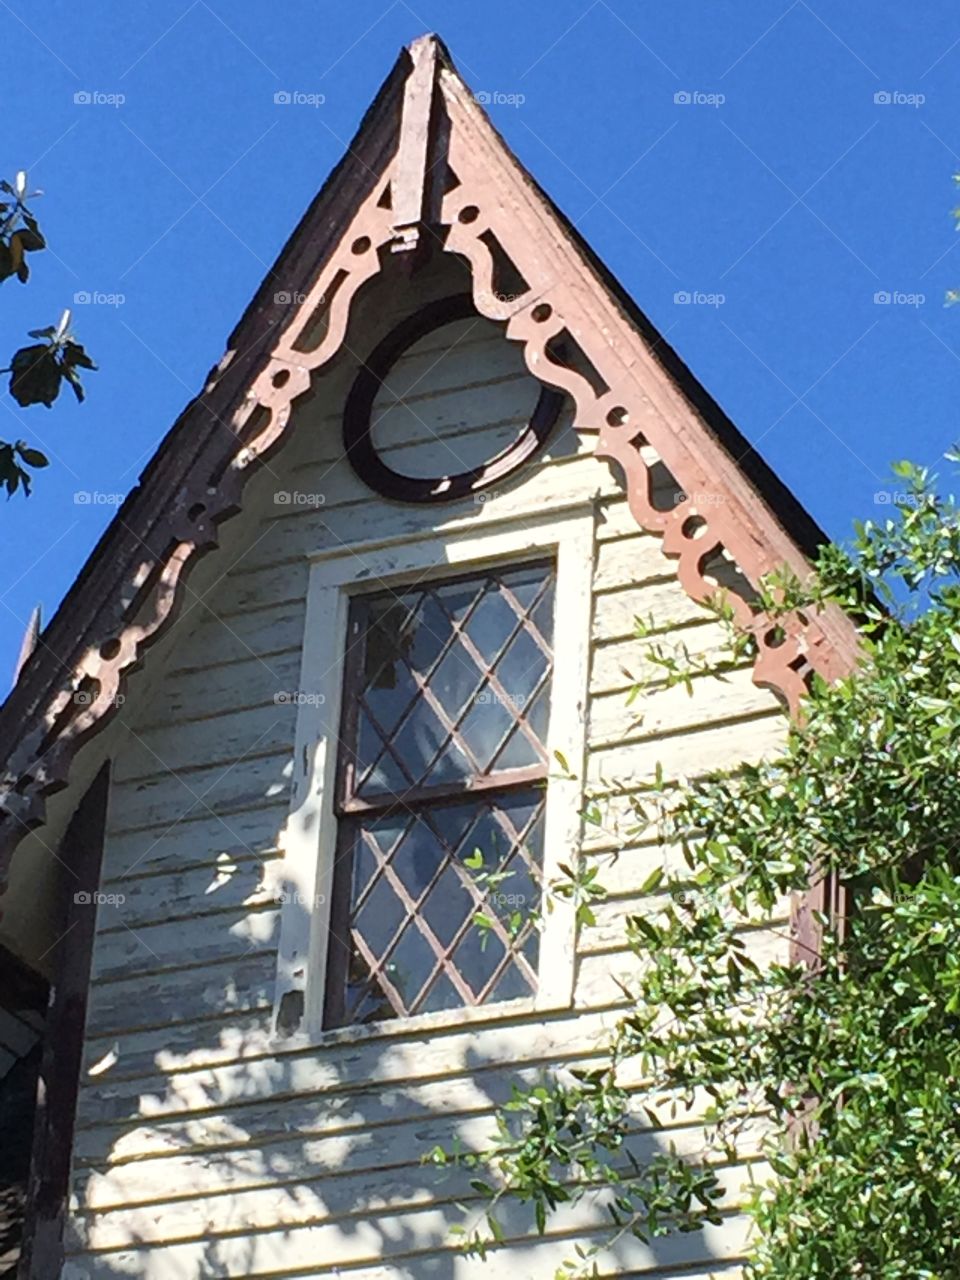 Gingerbread trim on a house